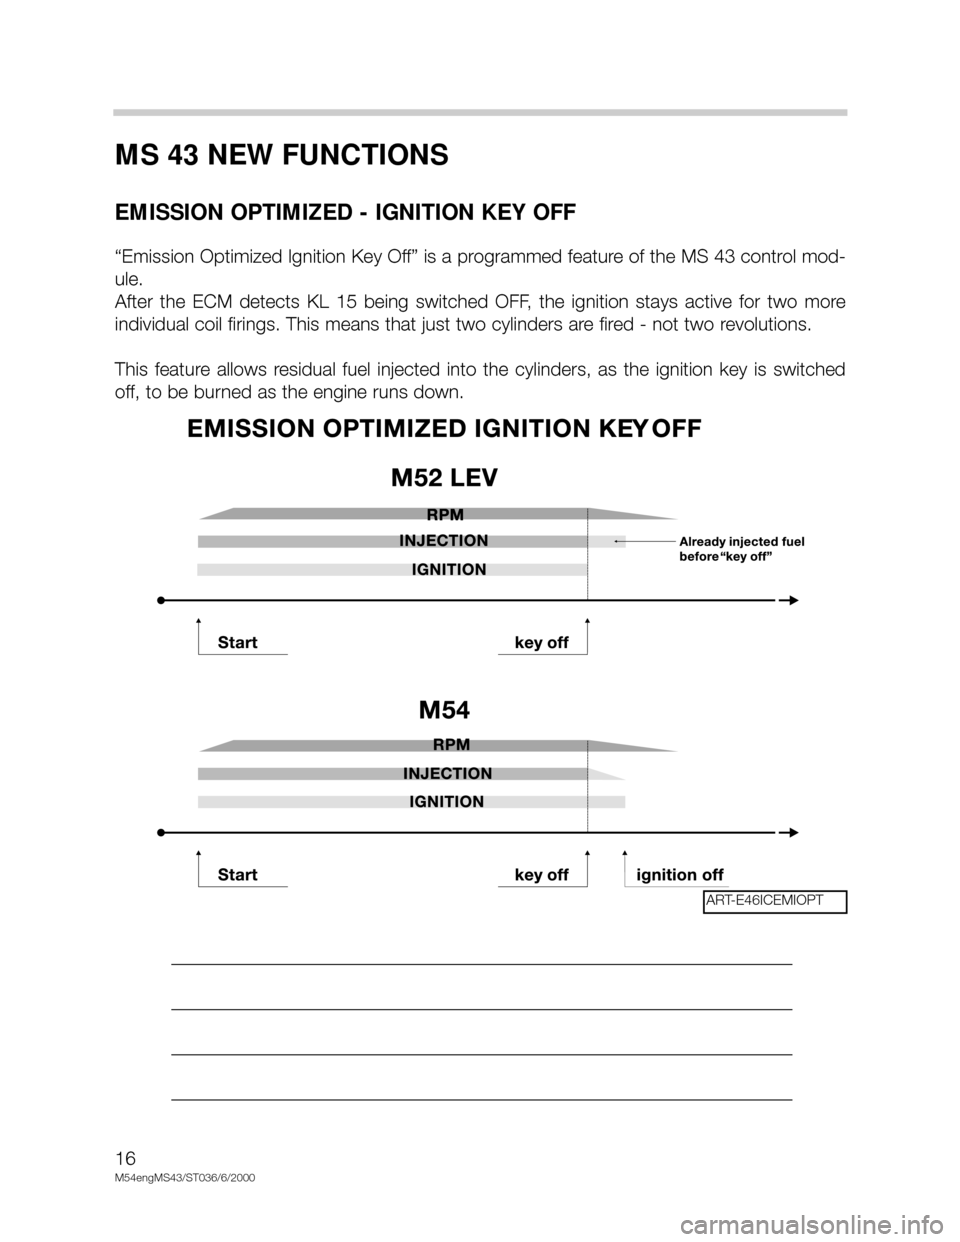 BMW X5 2002 E53 M54 Engine Workshop Manual 16
M54engMS43/ST036/6/2000
MS 43 NEW FUNCTIONS
EMISSION OPTIMIZED - IGNITION KEY OFF
“Emission Optimized Ignition Key Off” is a programmed feature of the MS 43 control mod-
ule. 
After  the  ECM  